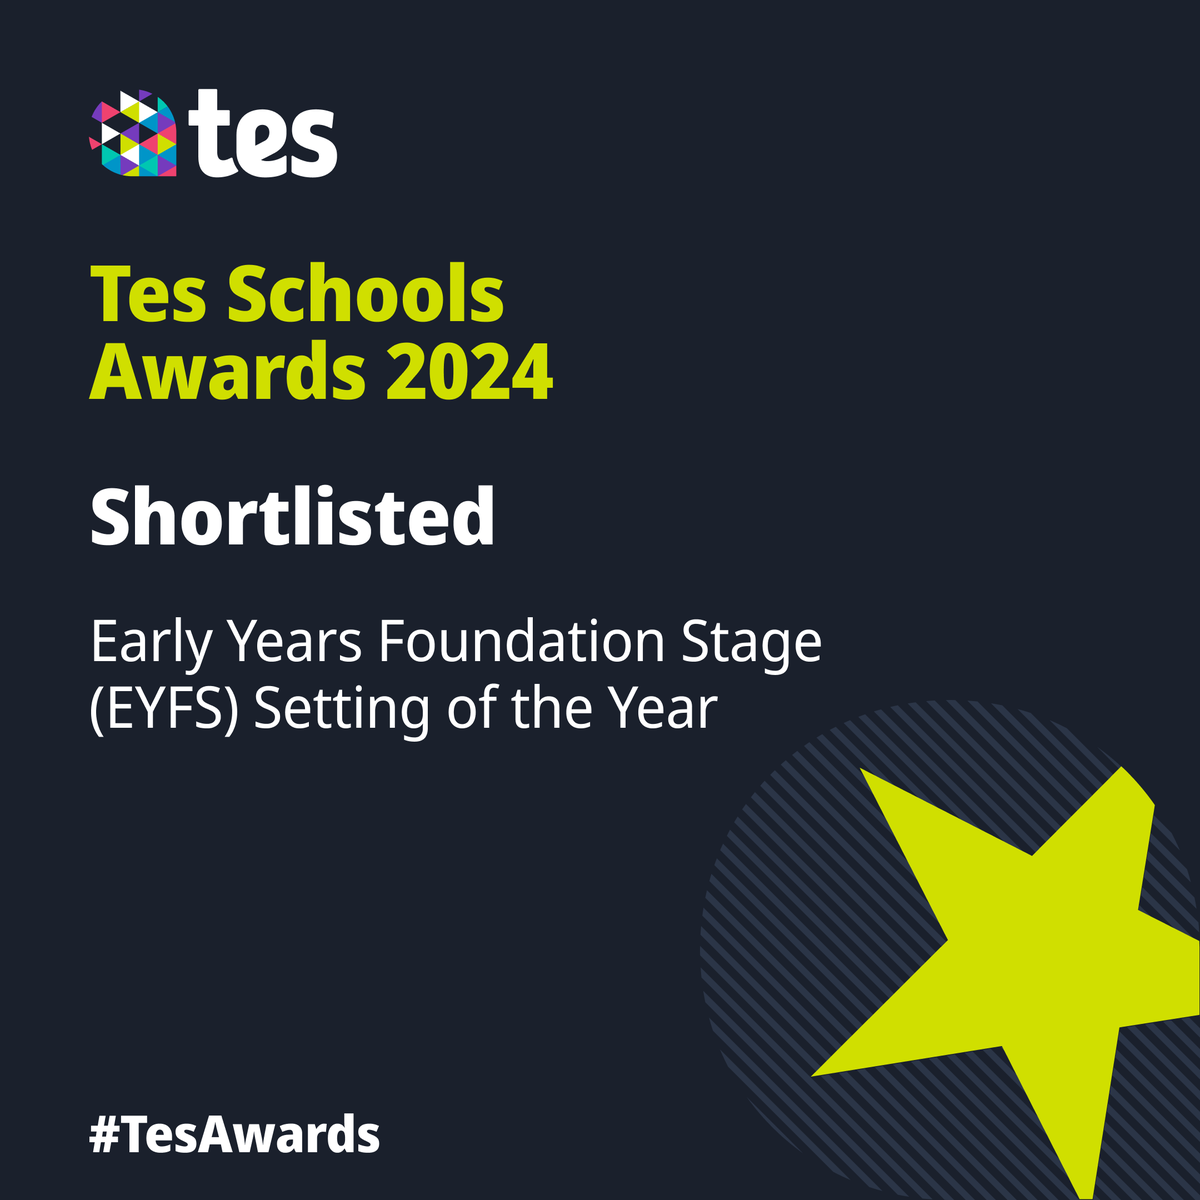 🎉 Fantastic News! 🎉 We're thrilled to share that @Carlton_MillsPS has been shortlisted for the prestigious @tes School Awards 2024 in the category of EYFS Setting of the Year! Huge congratulations to our amazing team at @Carlton_MillsPS for their dedication and commitment to